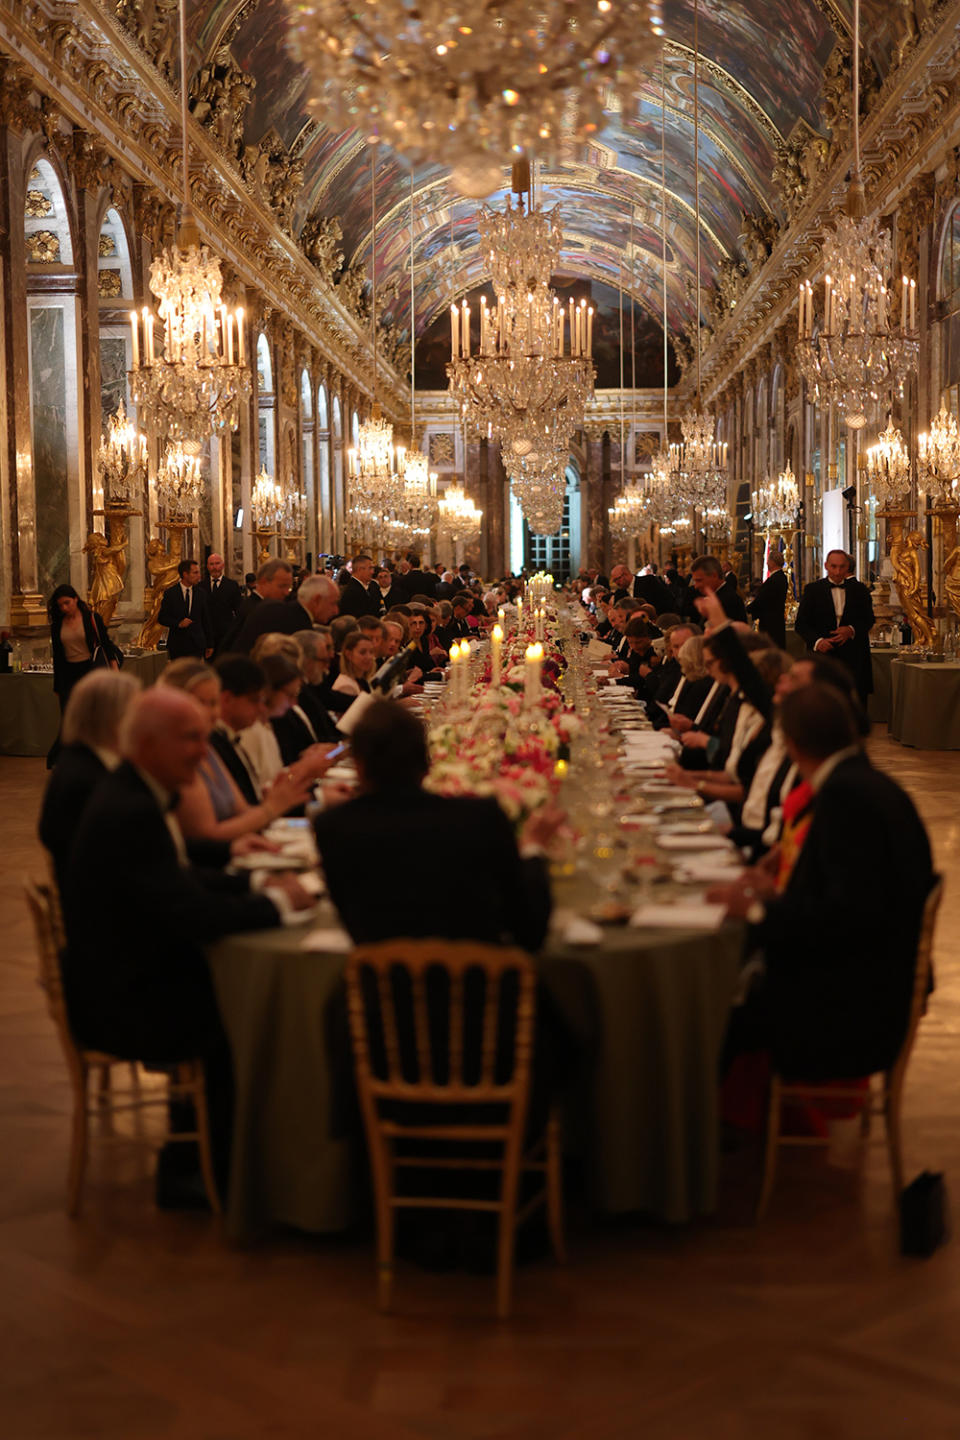 A general view of the state banquet at the Palace of Versailles on September 20